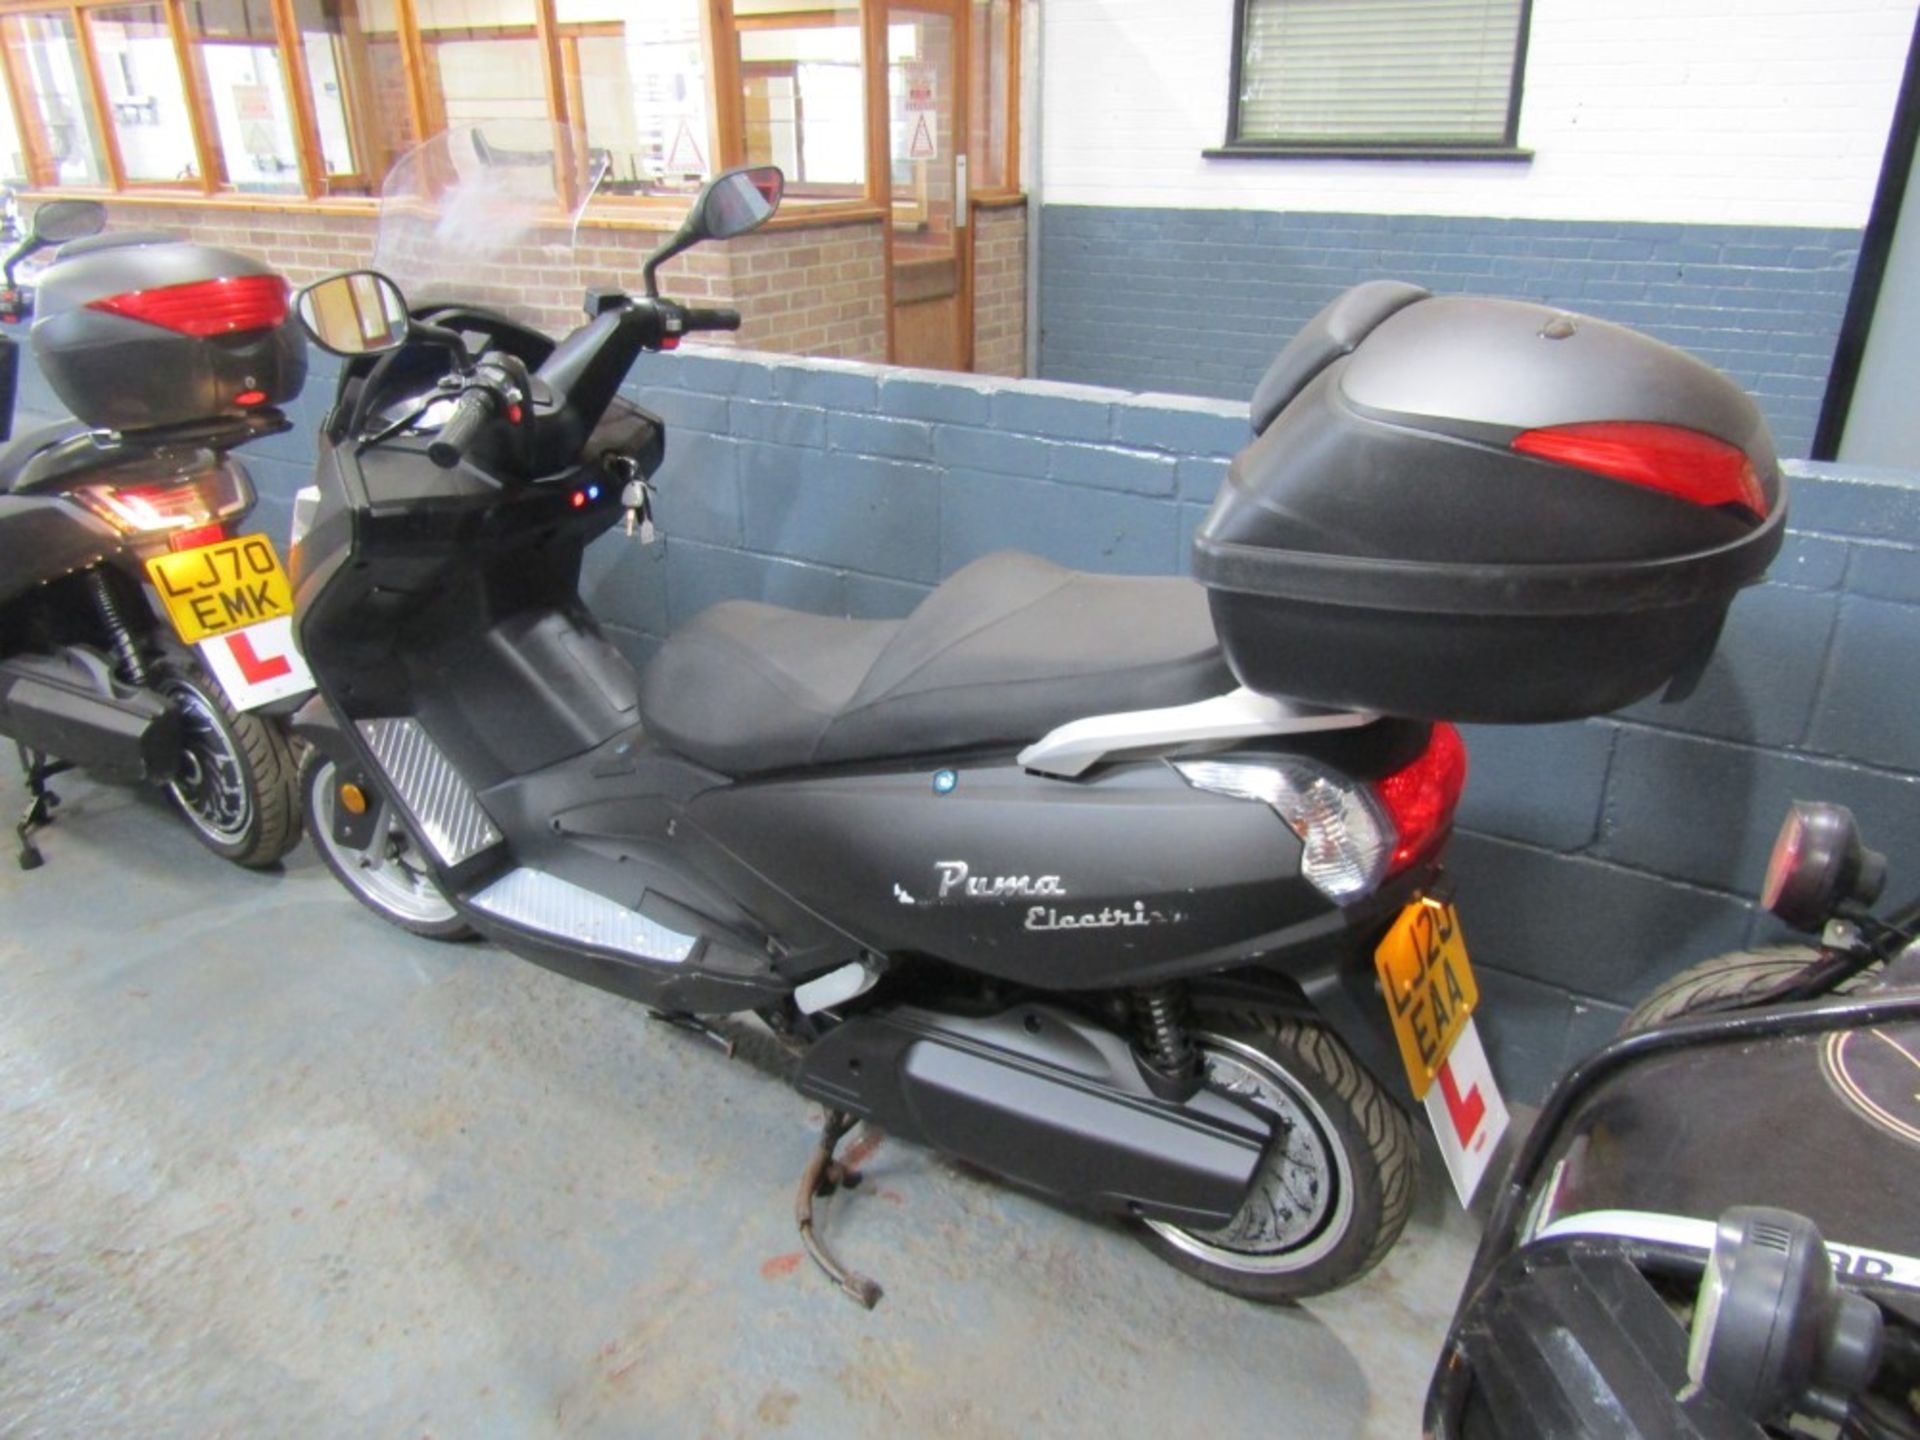 20 reg EFUN PUMA ELECTRIC SCOOTER, 1ST REG 07/20, 6795KM, V5 HERE, 1 OWNER FROM NEW [NO VAT] - Image 2 of 3